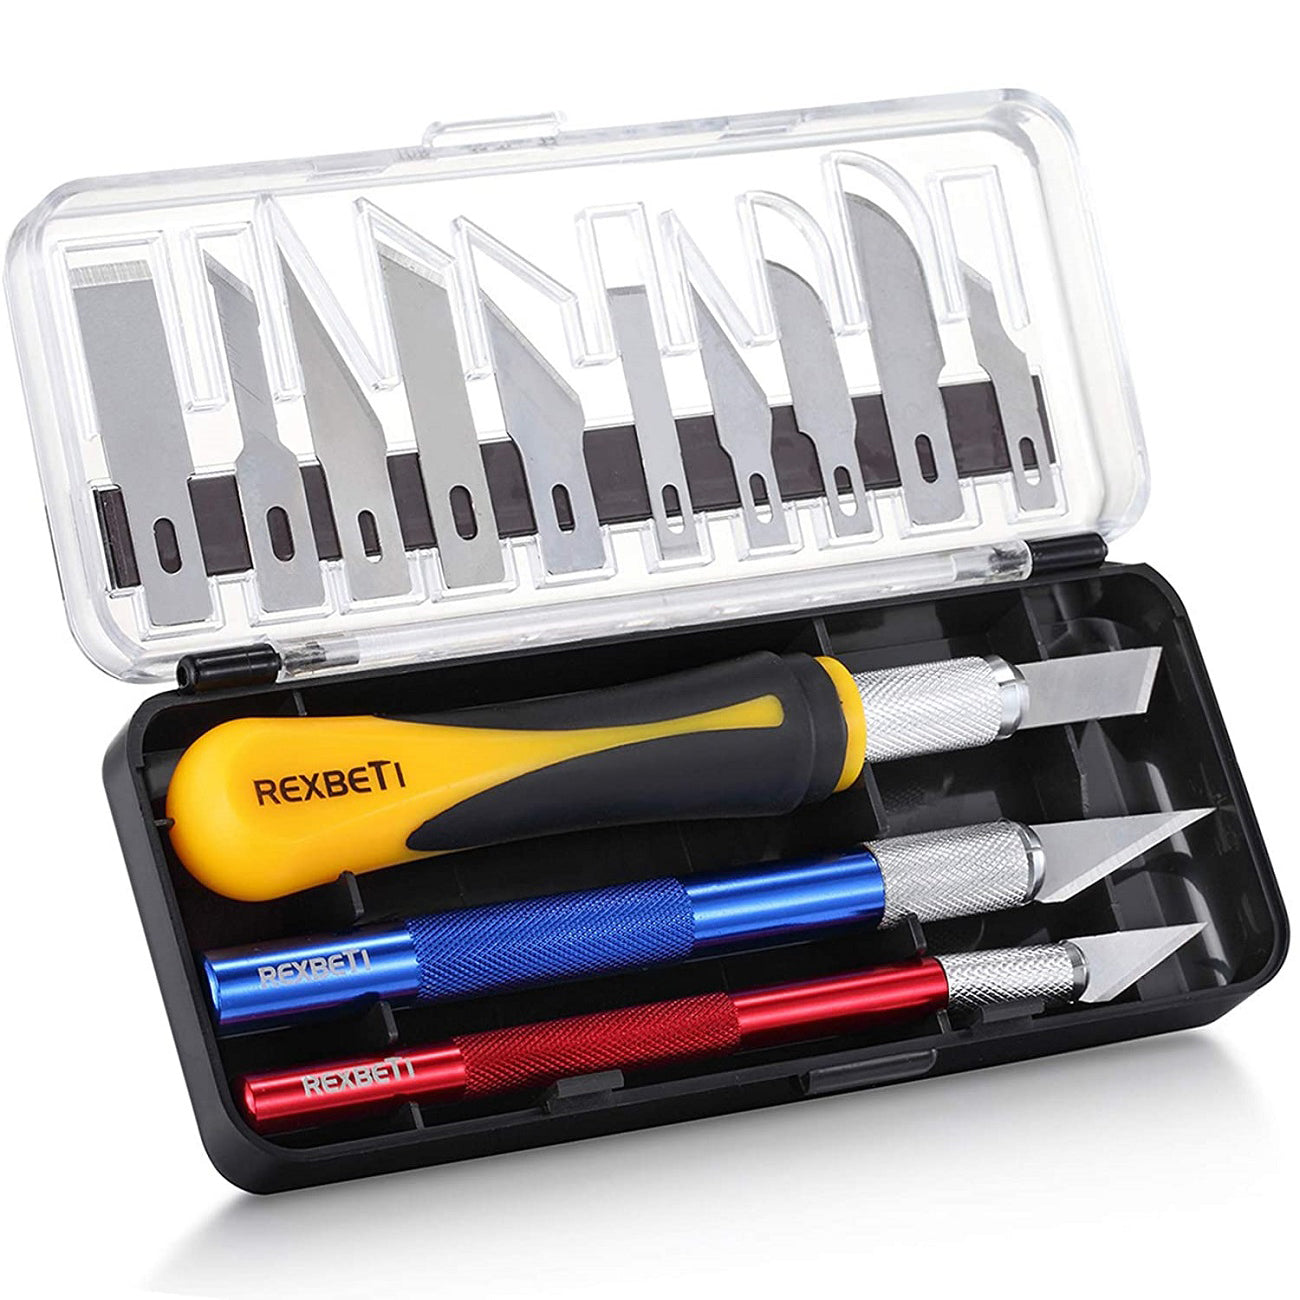 Black+decker Craft Hobby Knife Kit with 26 Assorted Blades and Cutting Mat (bdht14001)